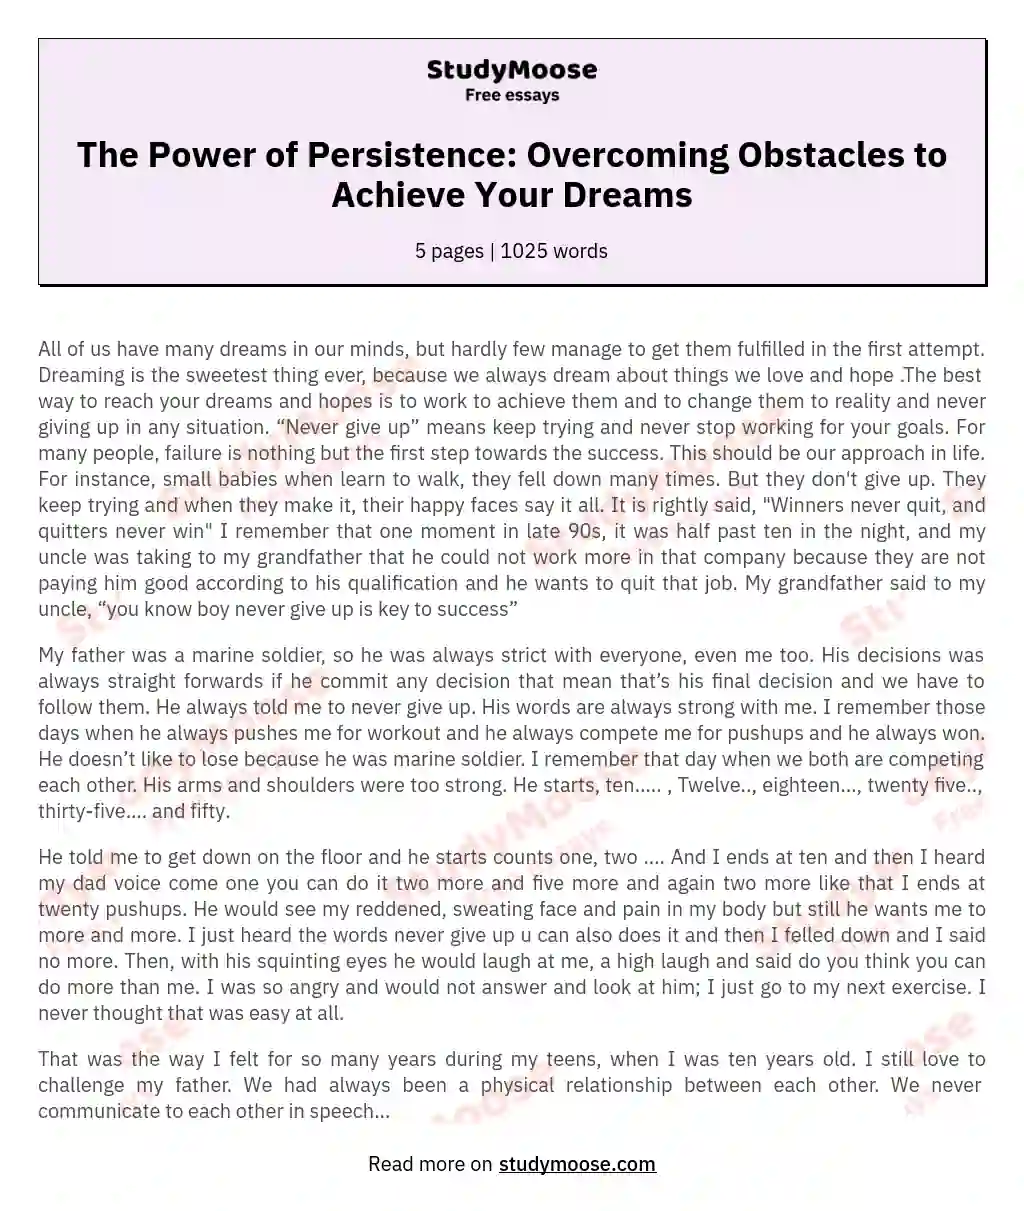 The Power of Persistence: Overcoming Obstacles to Achieve Your Dreams essay